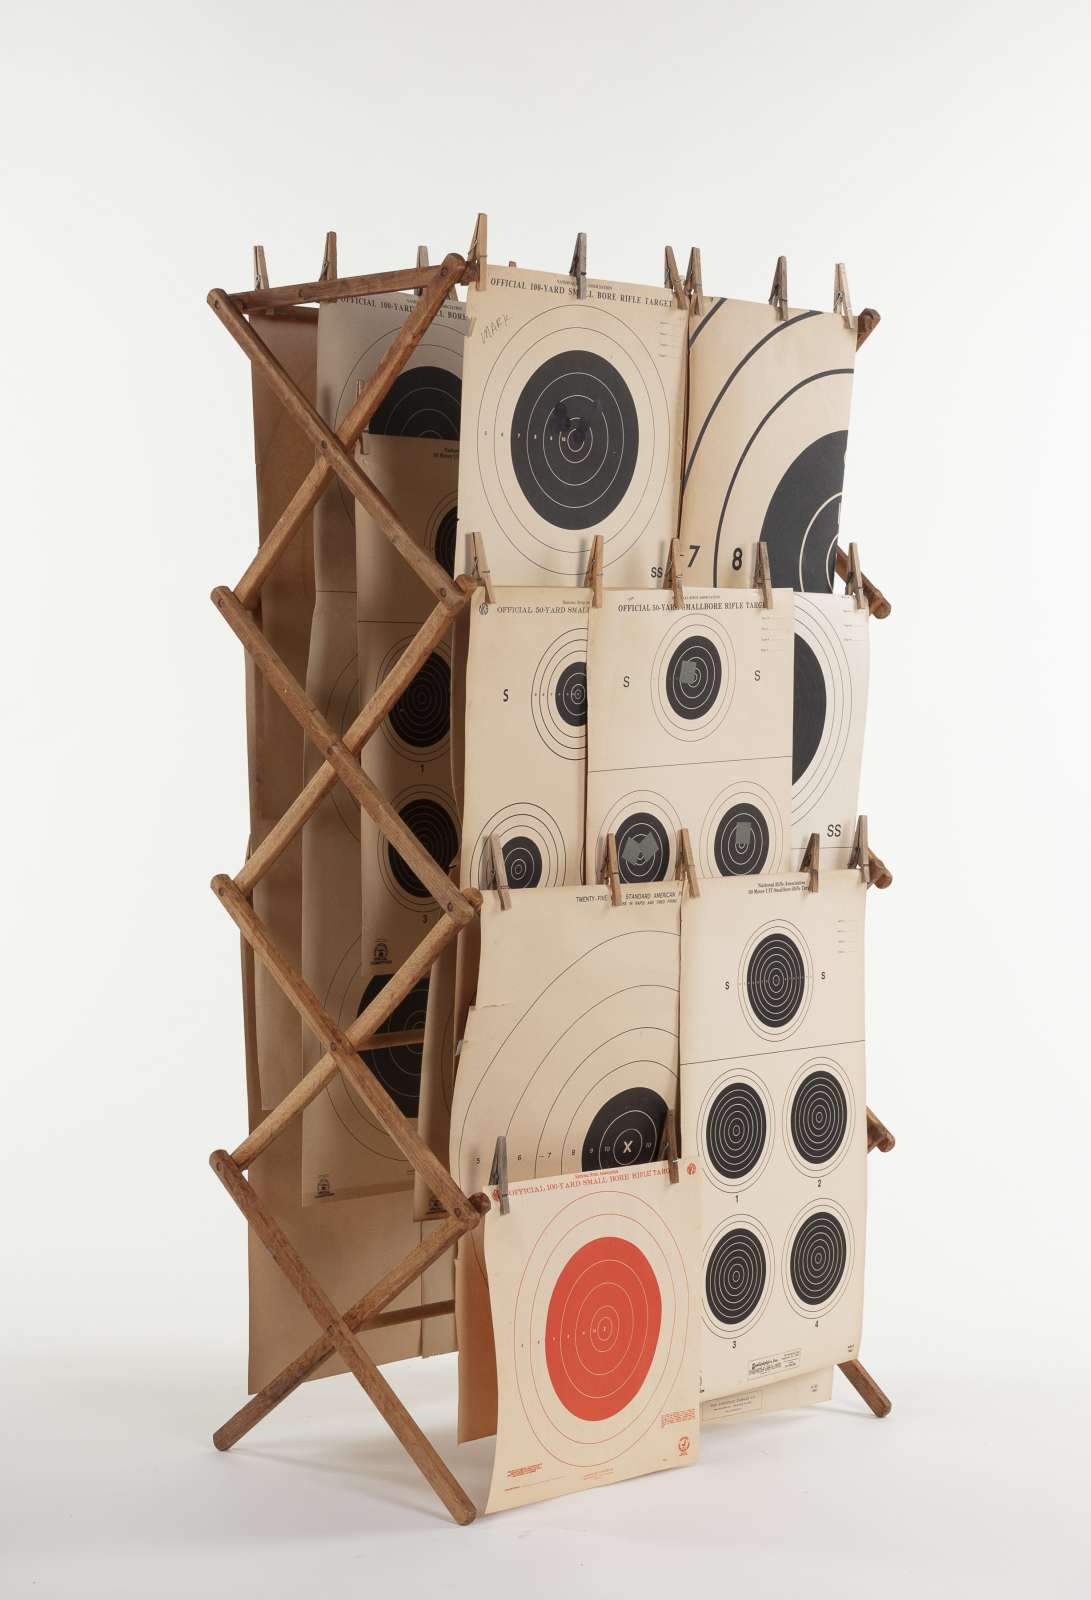 Lonnie Holley, Hung Out III, 2020, wooden clothes rack, wooden pegs and paper rifle targets, 144.5 x 75.5 x 42 cm